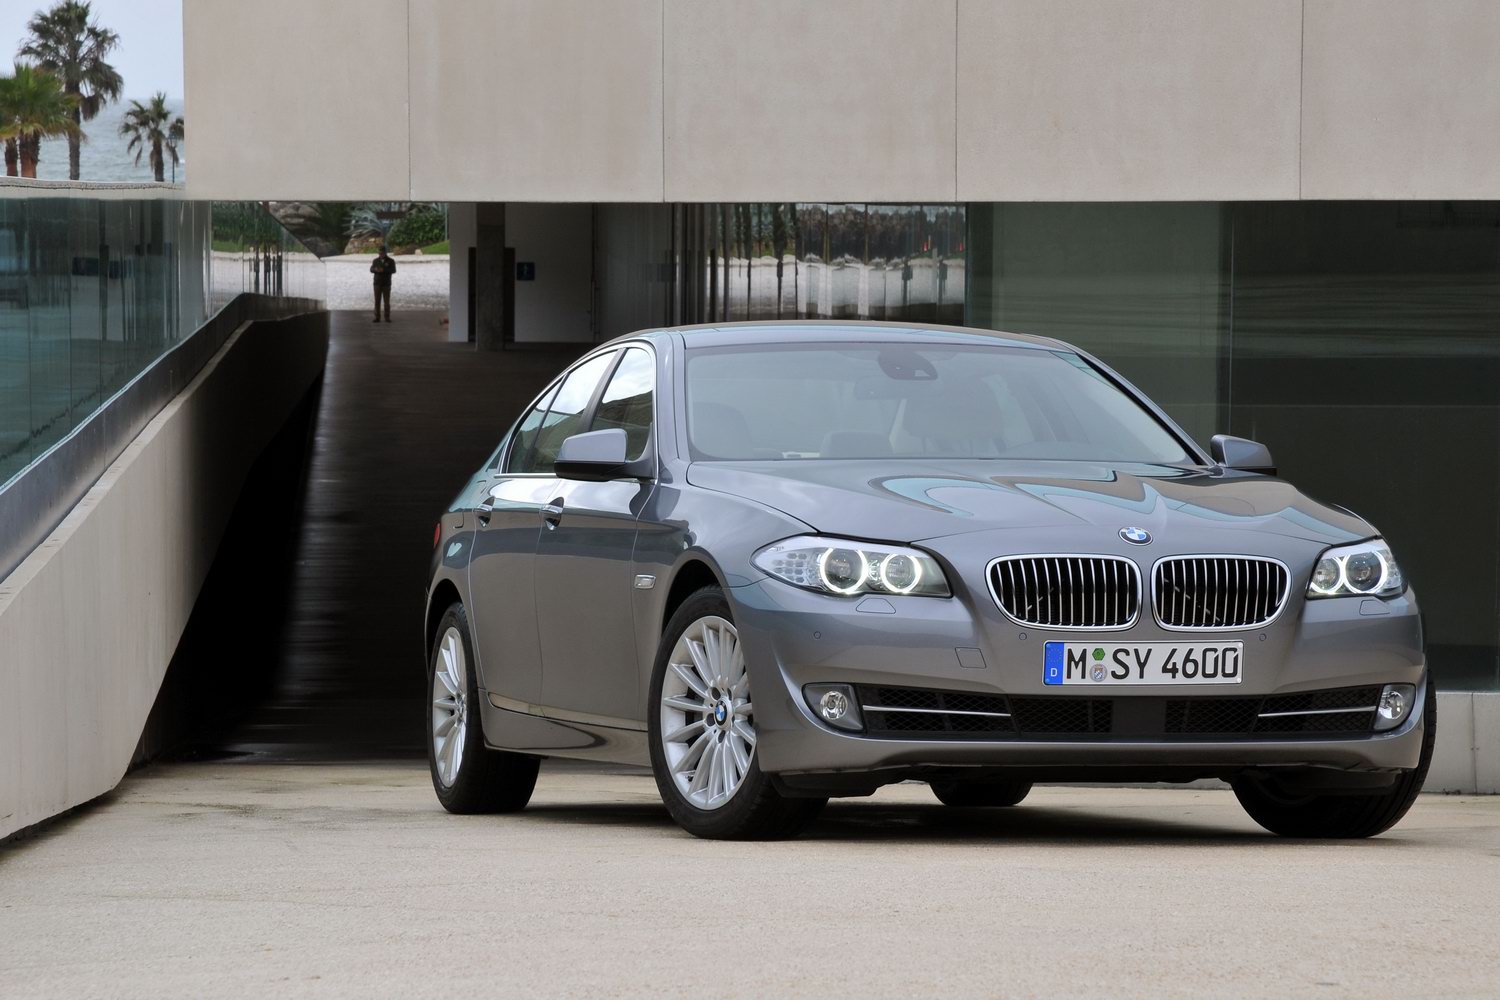 BMW 5 Series F10 (2010-2017) used car buying guide